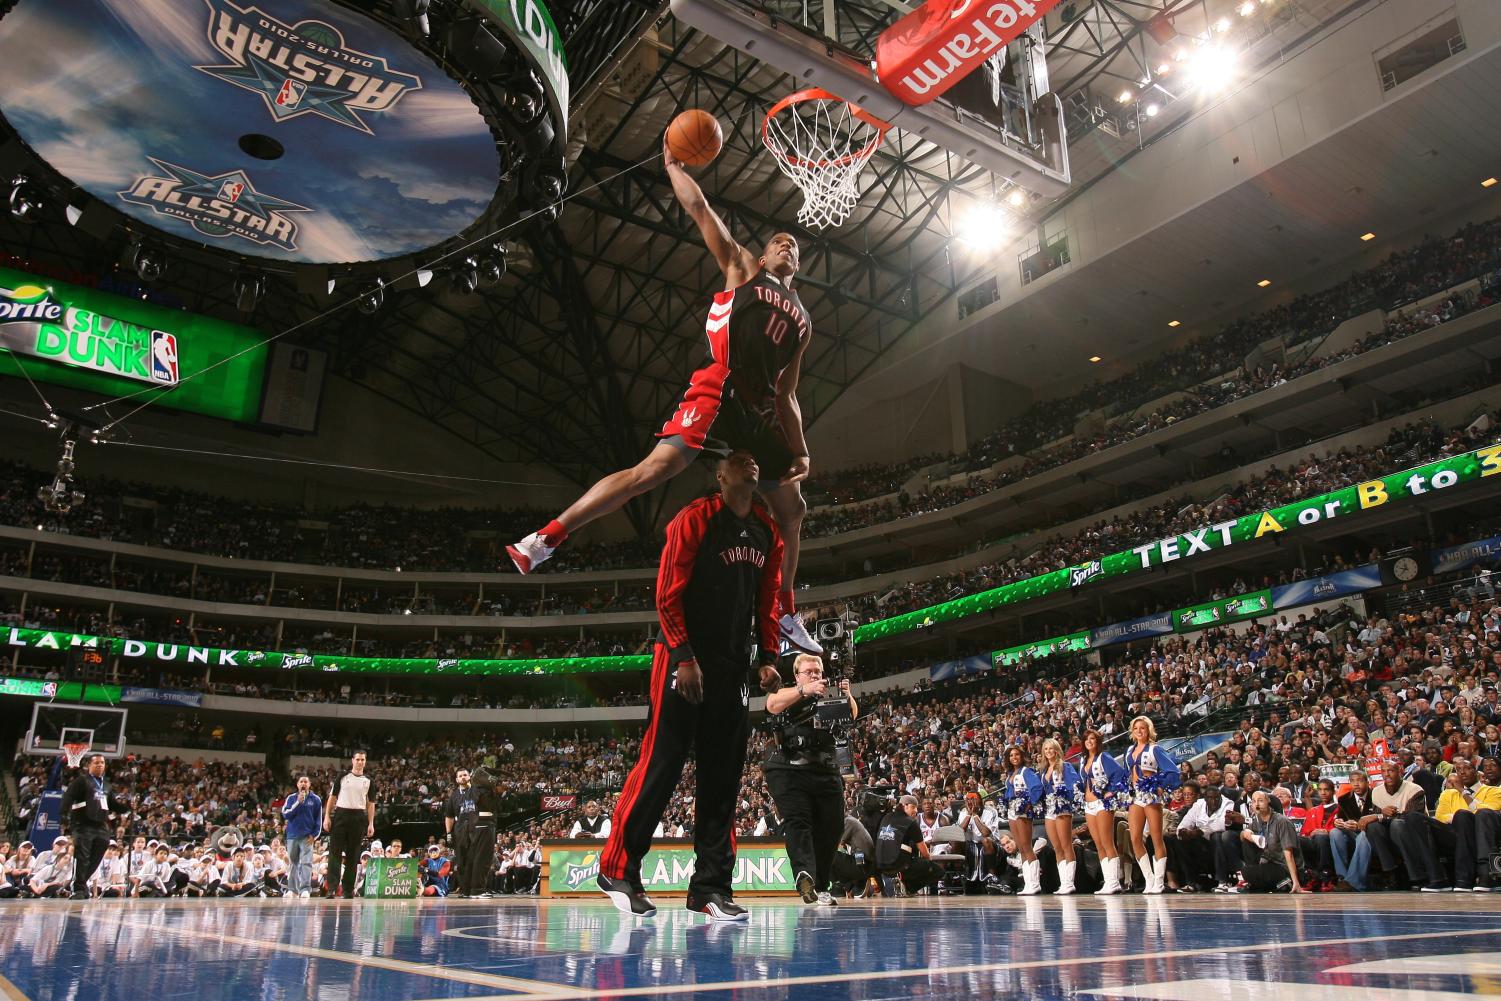 Demar Derozen of the Toronto Raptors dunks over teammate Sony Weems during the 2010 Dunk Contest in Dallas. Now, when players perform dunks like this, the crowd has little reaction.